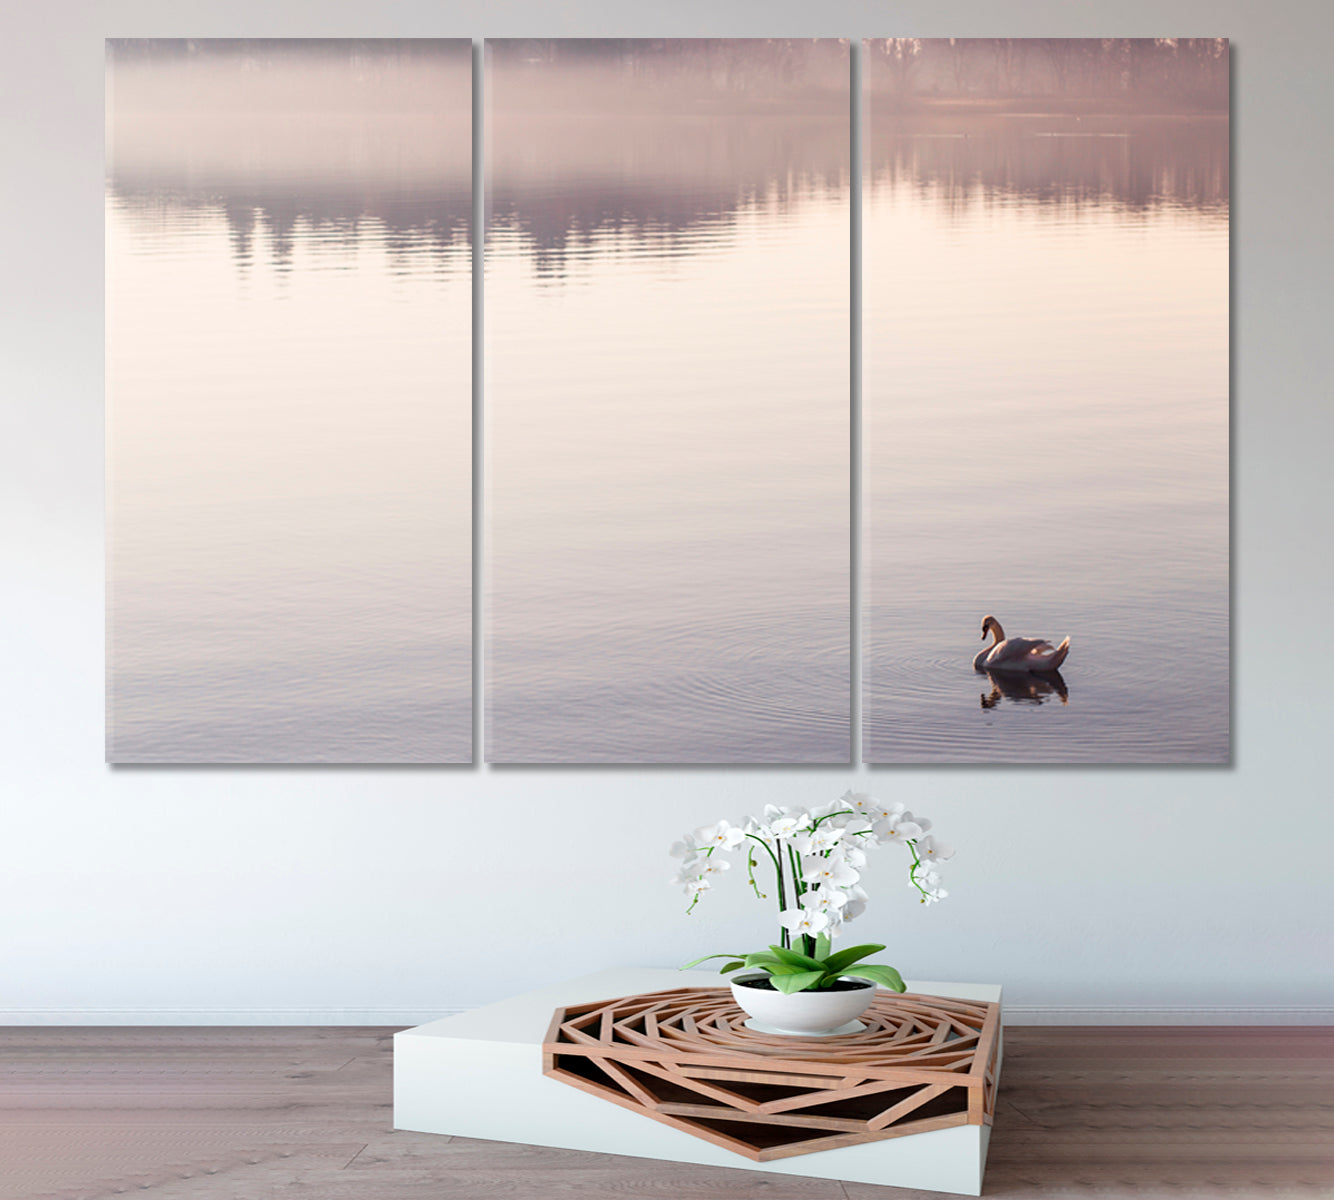 SERENITY Peaceful Landscape Water Reflection Bodensee Lake Germany Little Bird Duck Flapping Wings in the Water Scenery Landscape Fine Art Print Artesty   